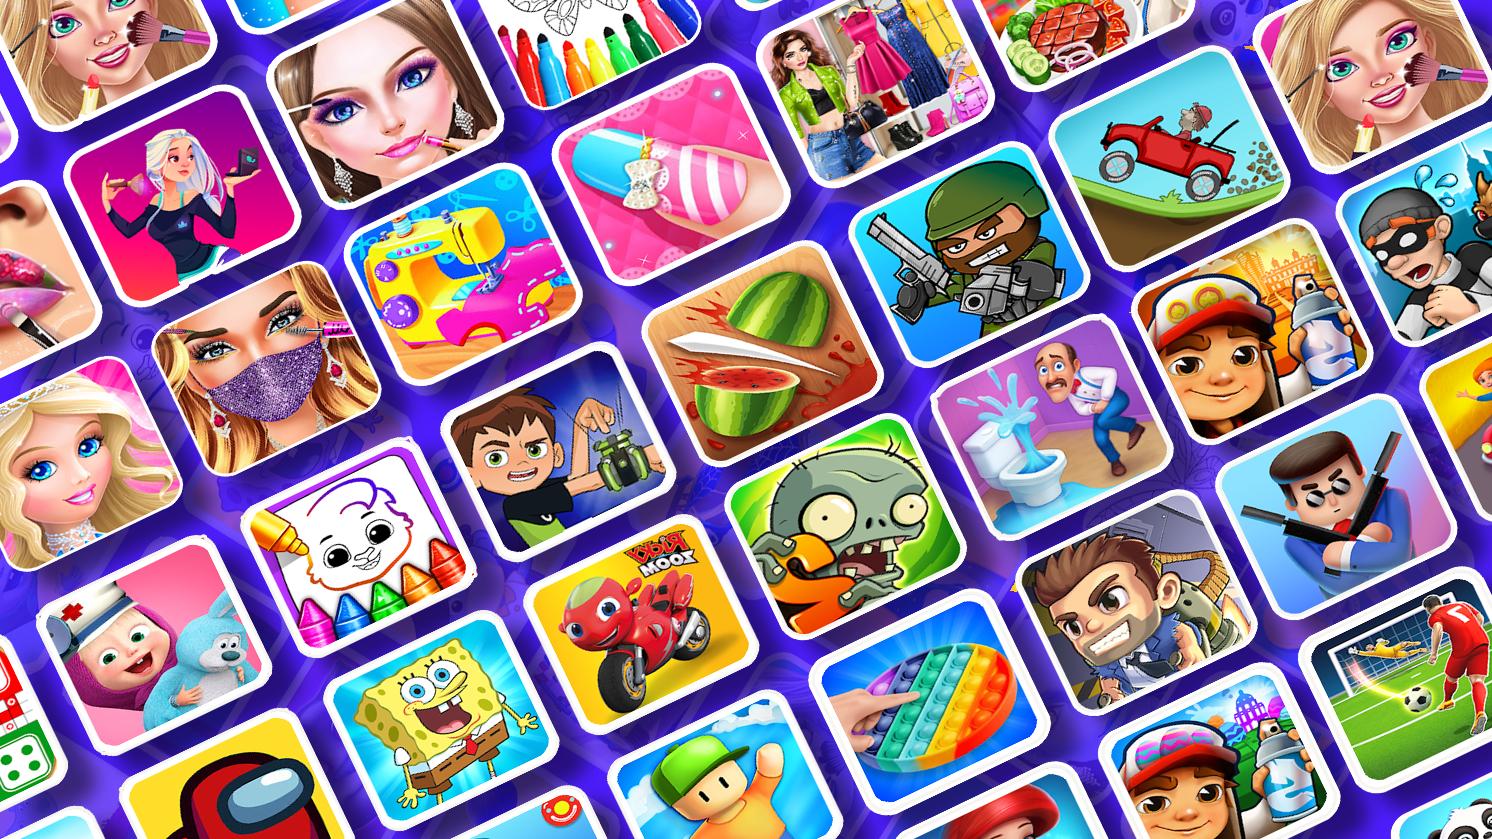 Subway Surfers Games - Play Free Online Games on Friv 2